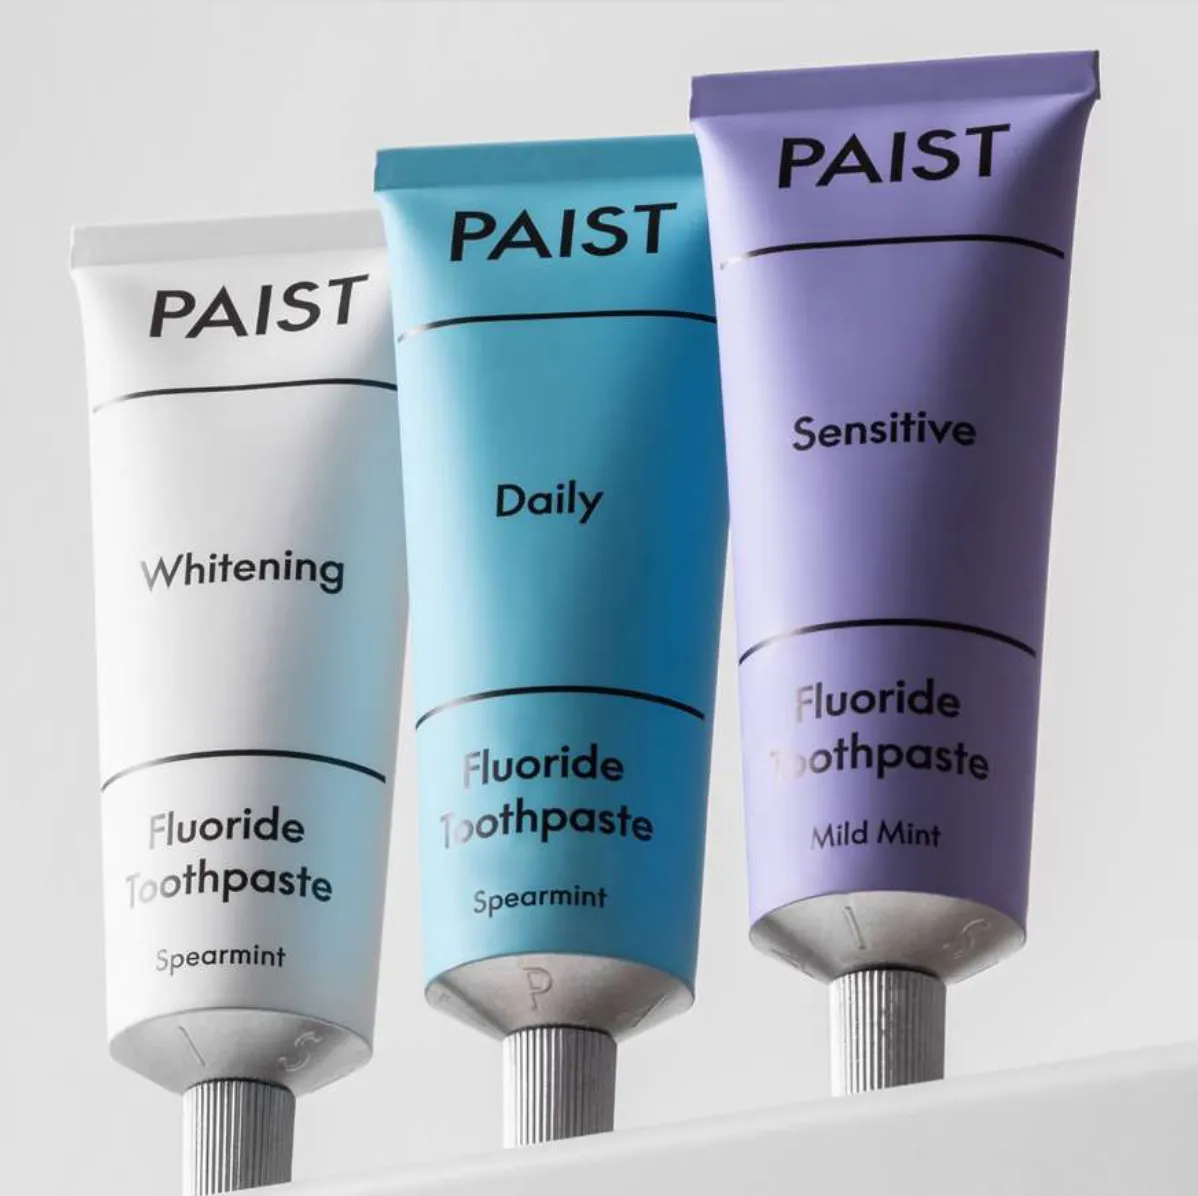 Free PAIST High Quality Toothpaste